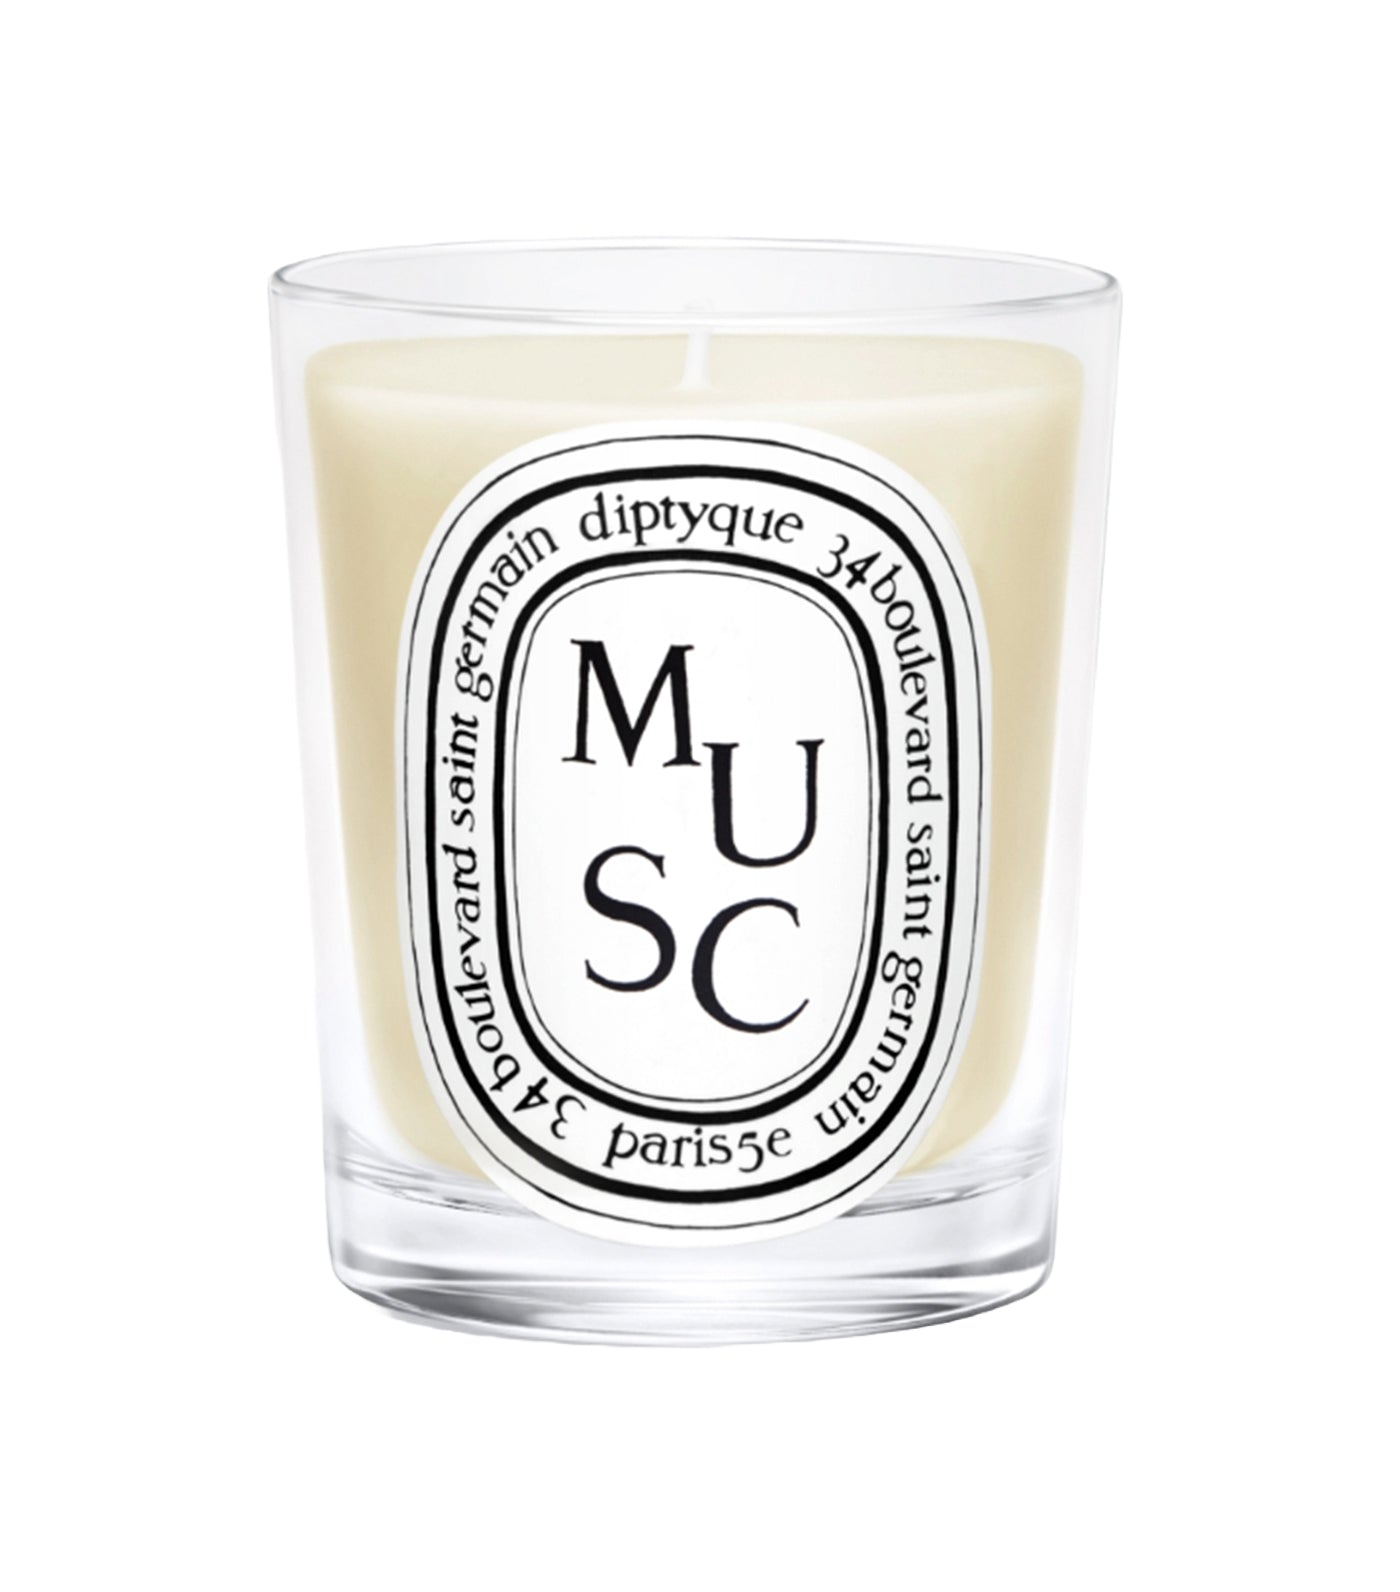 Musc / Musk Candle